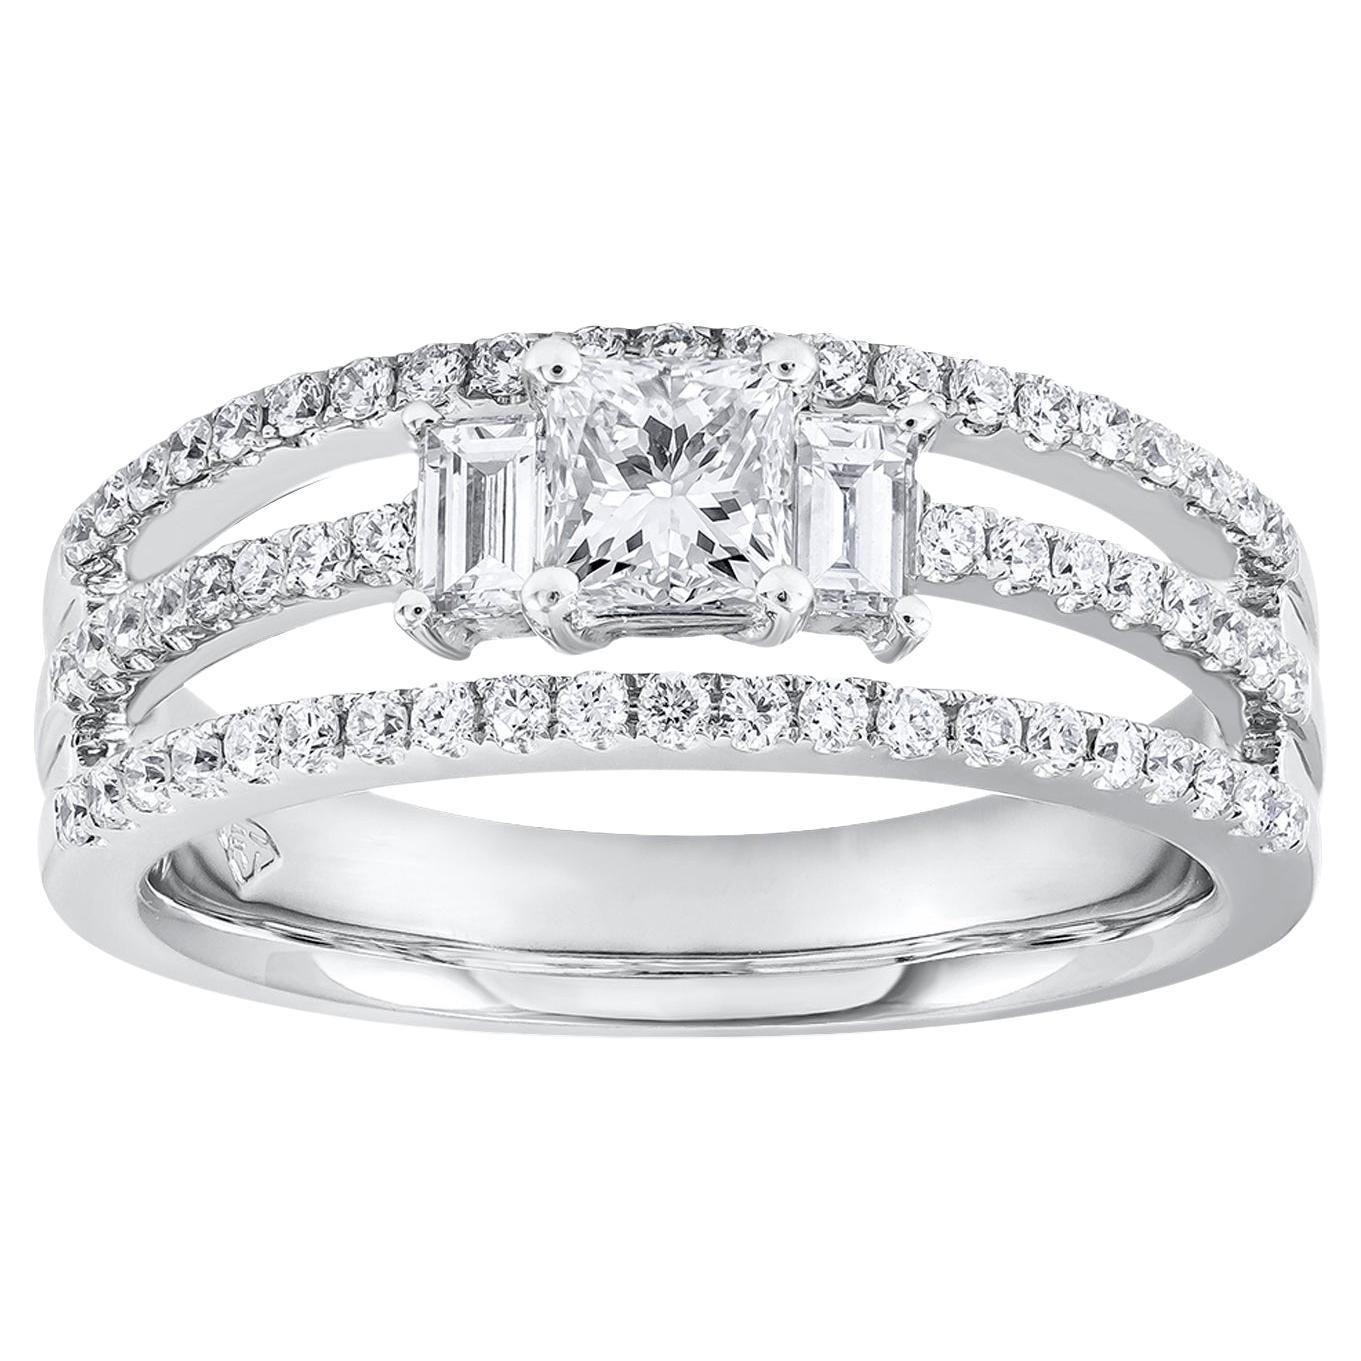 1.05 Carats Total Mixed Cut Diamond Three-Row Open-Work Engagement Ring For Sale